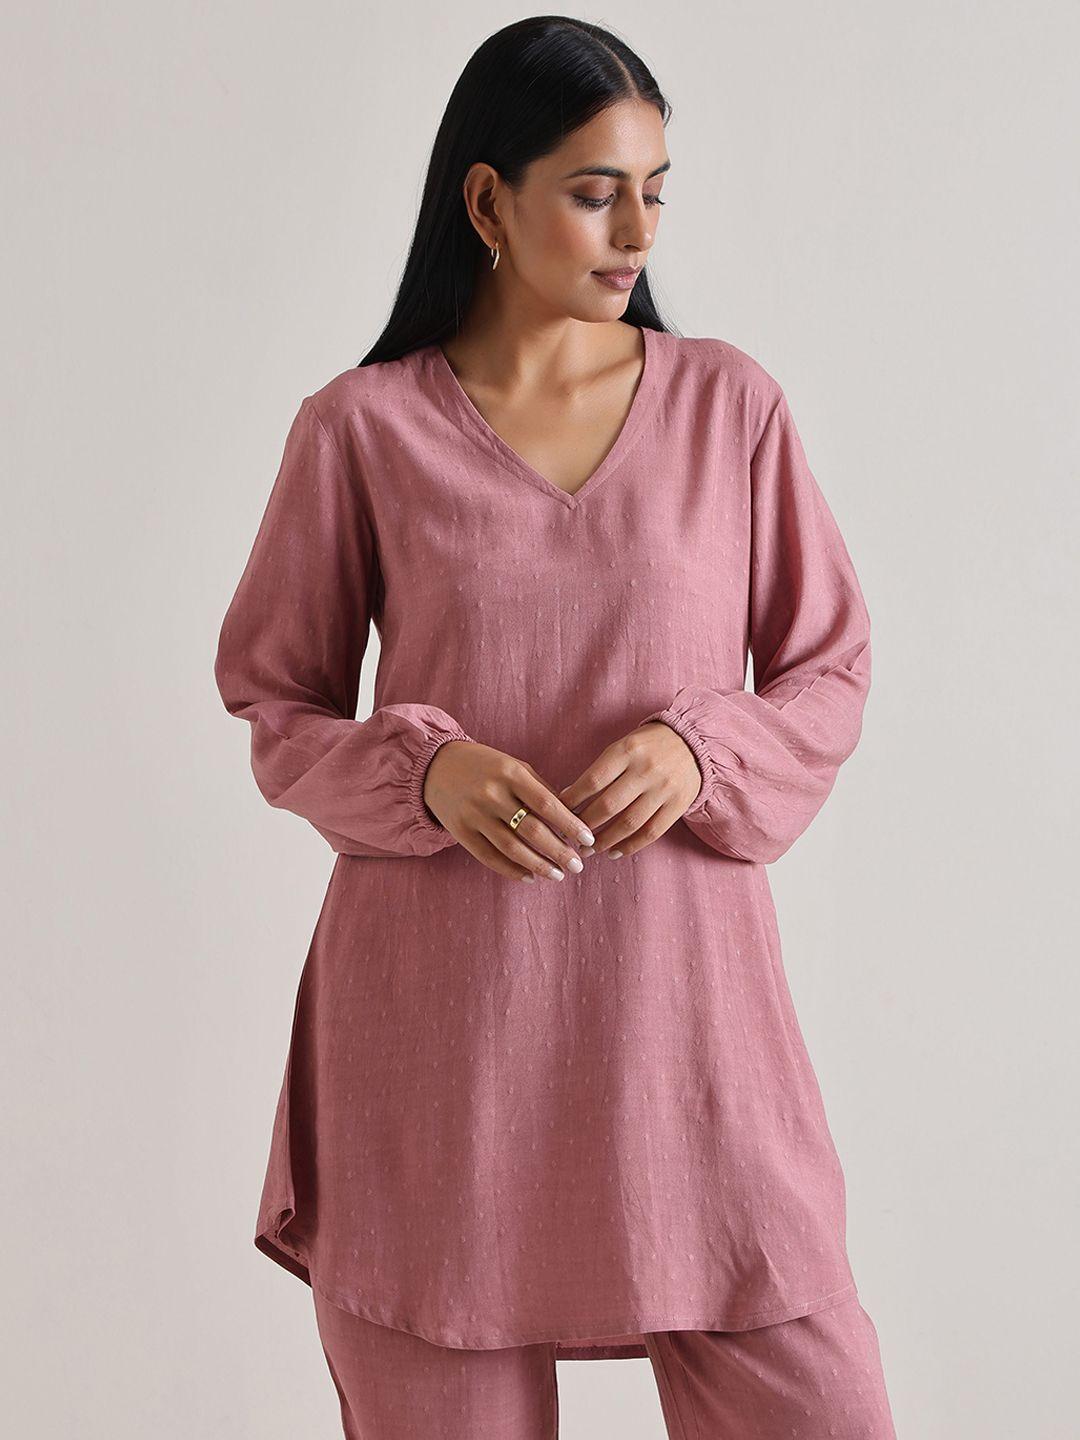 truebrowns v-neck tunic with trousers co-ords